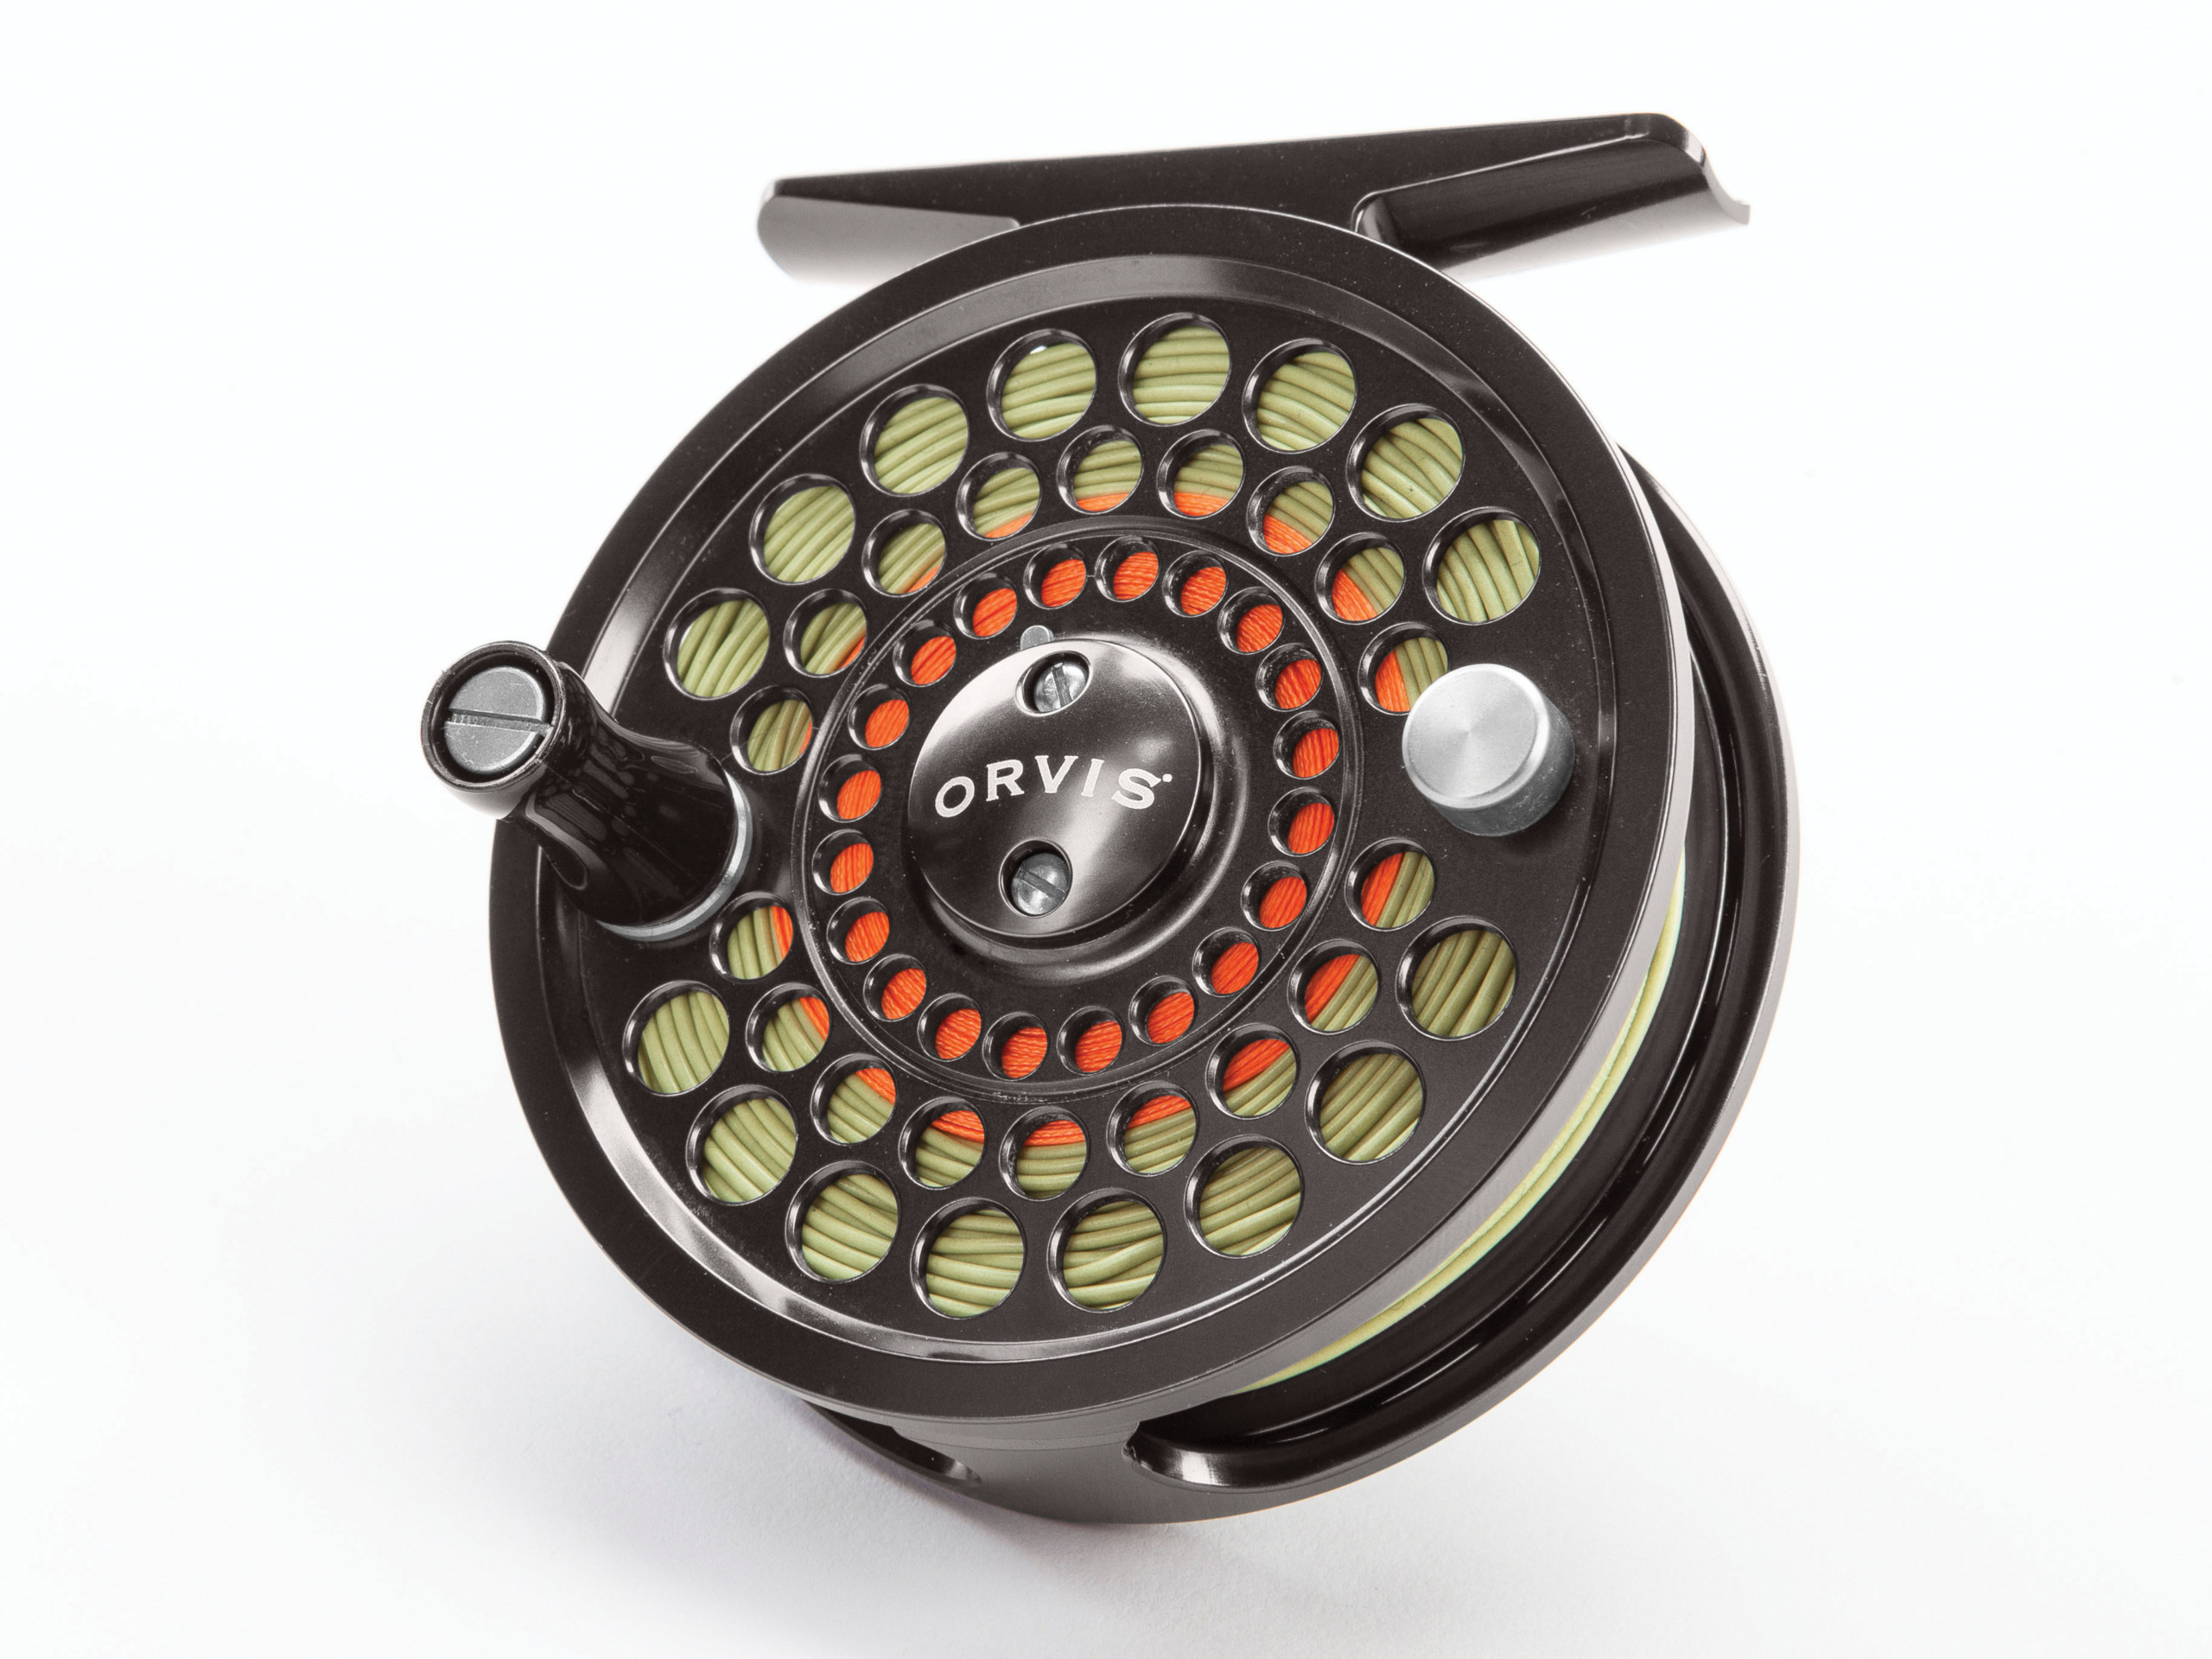 New Orvis Battenkill Click and Battenkill Disc Reel Review